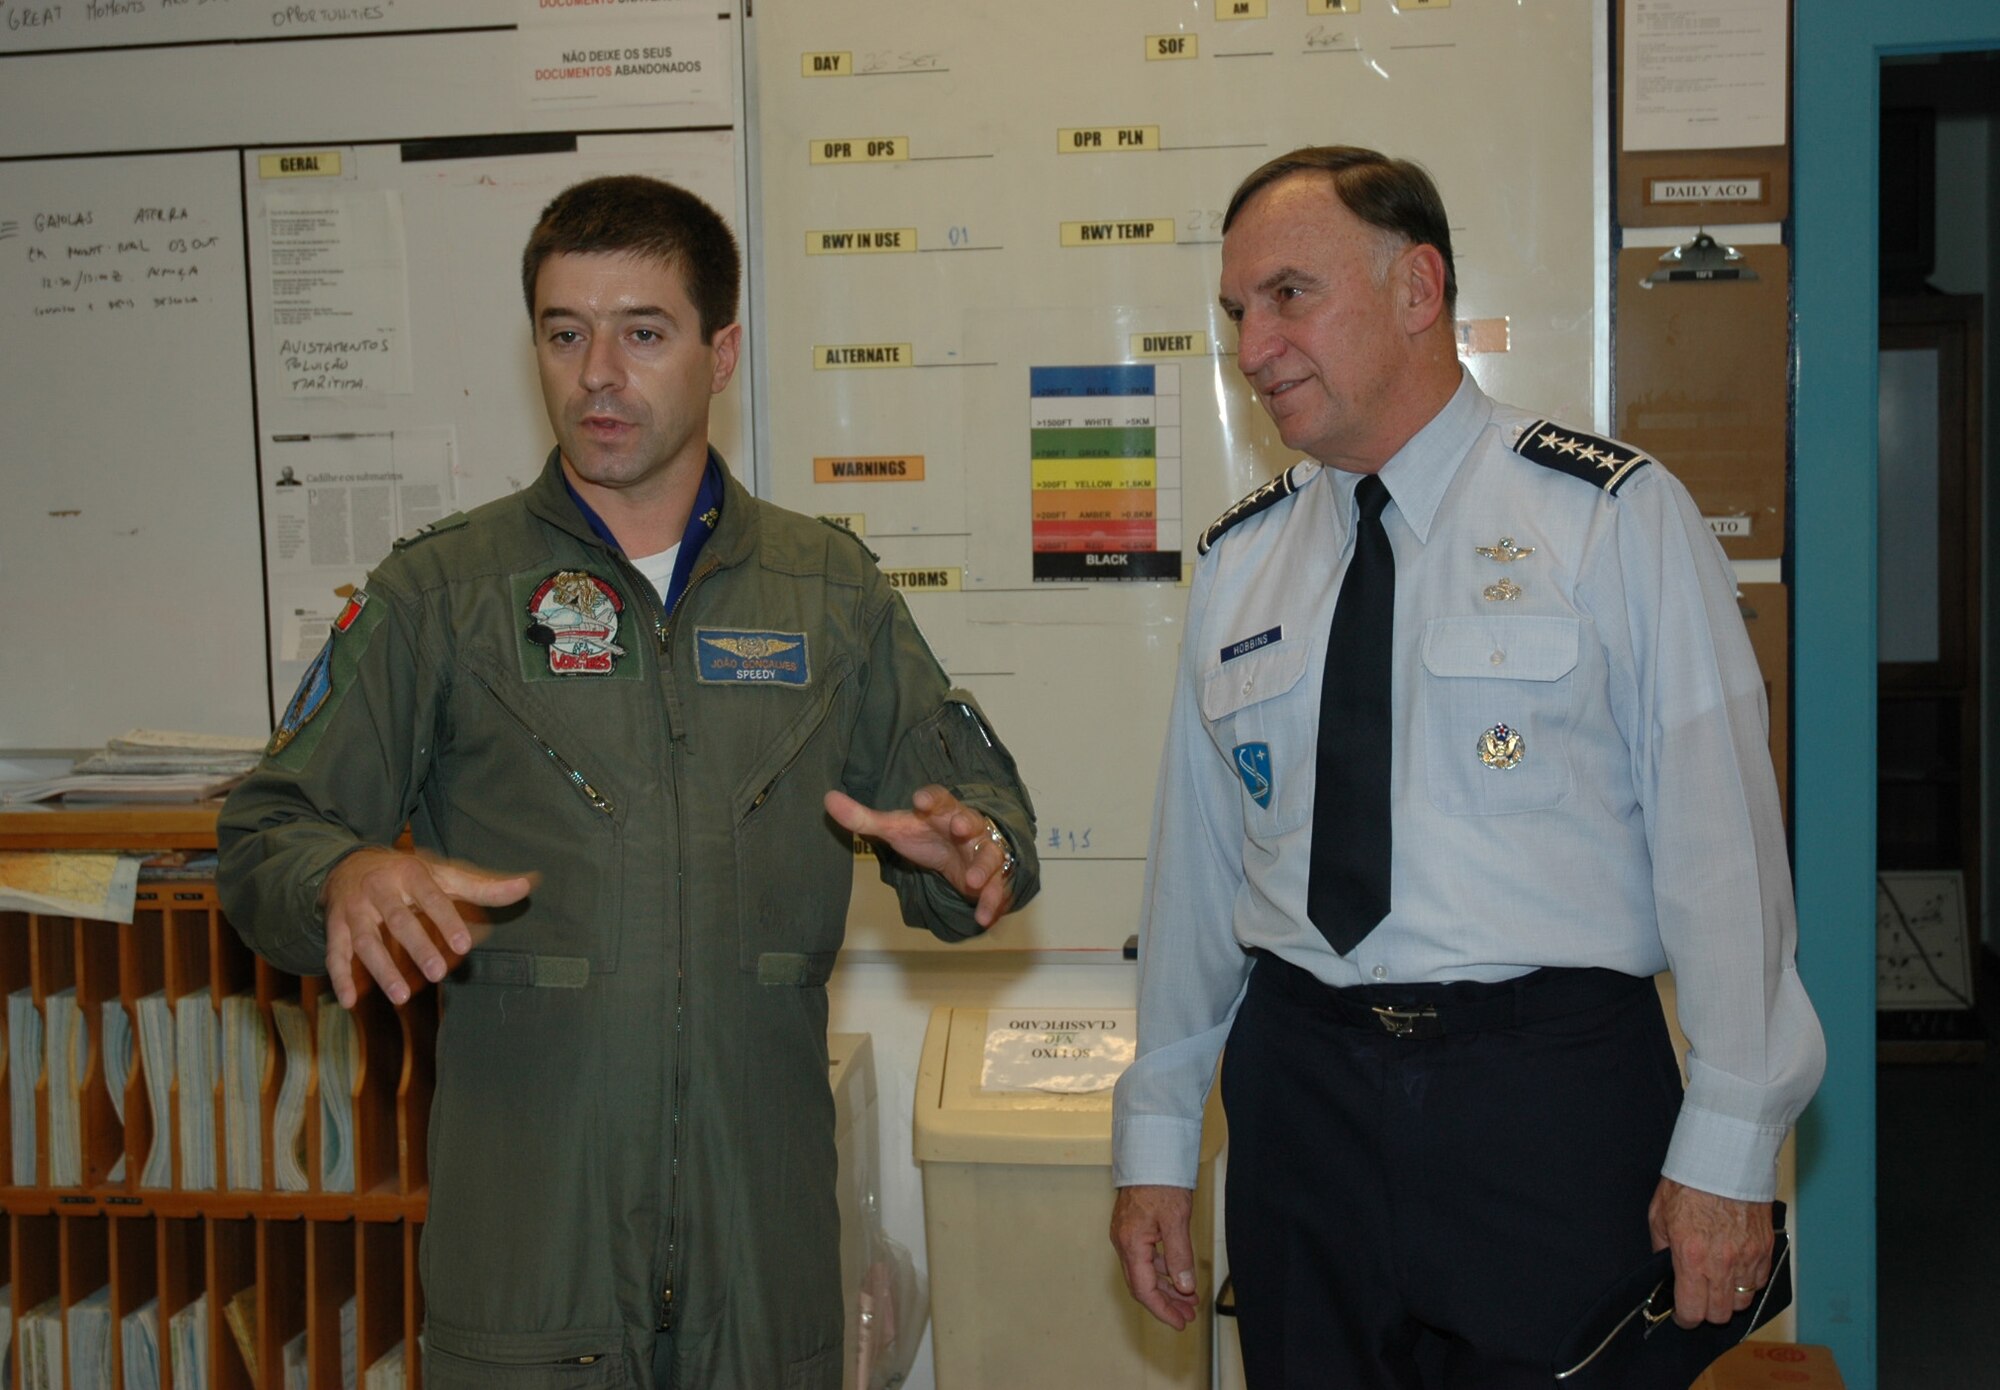 MONTE REAL AIR BASE, Portugal--Gen. Tom Hobbins (right), U.S. Air Forces in Europe commander, receives an orientation visit to the 201st Falcon Squadron at Monte Real Air Base, Portugal, from Portuguese Major Joao ?Speedy? Goncalves Sep. 29. (U.S. Air Force Photo/Capt. Elizabeth Culbertson)

